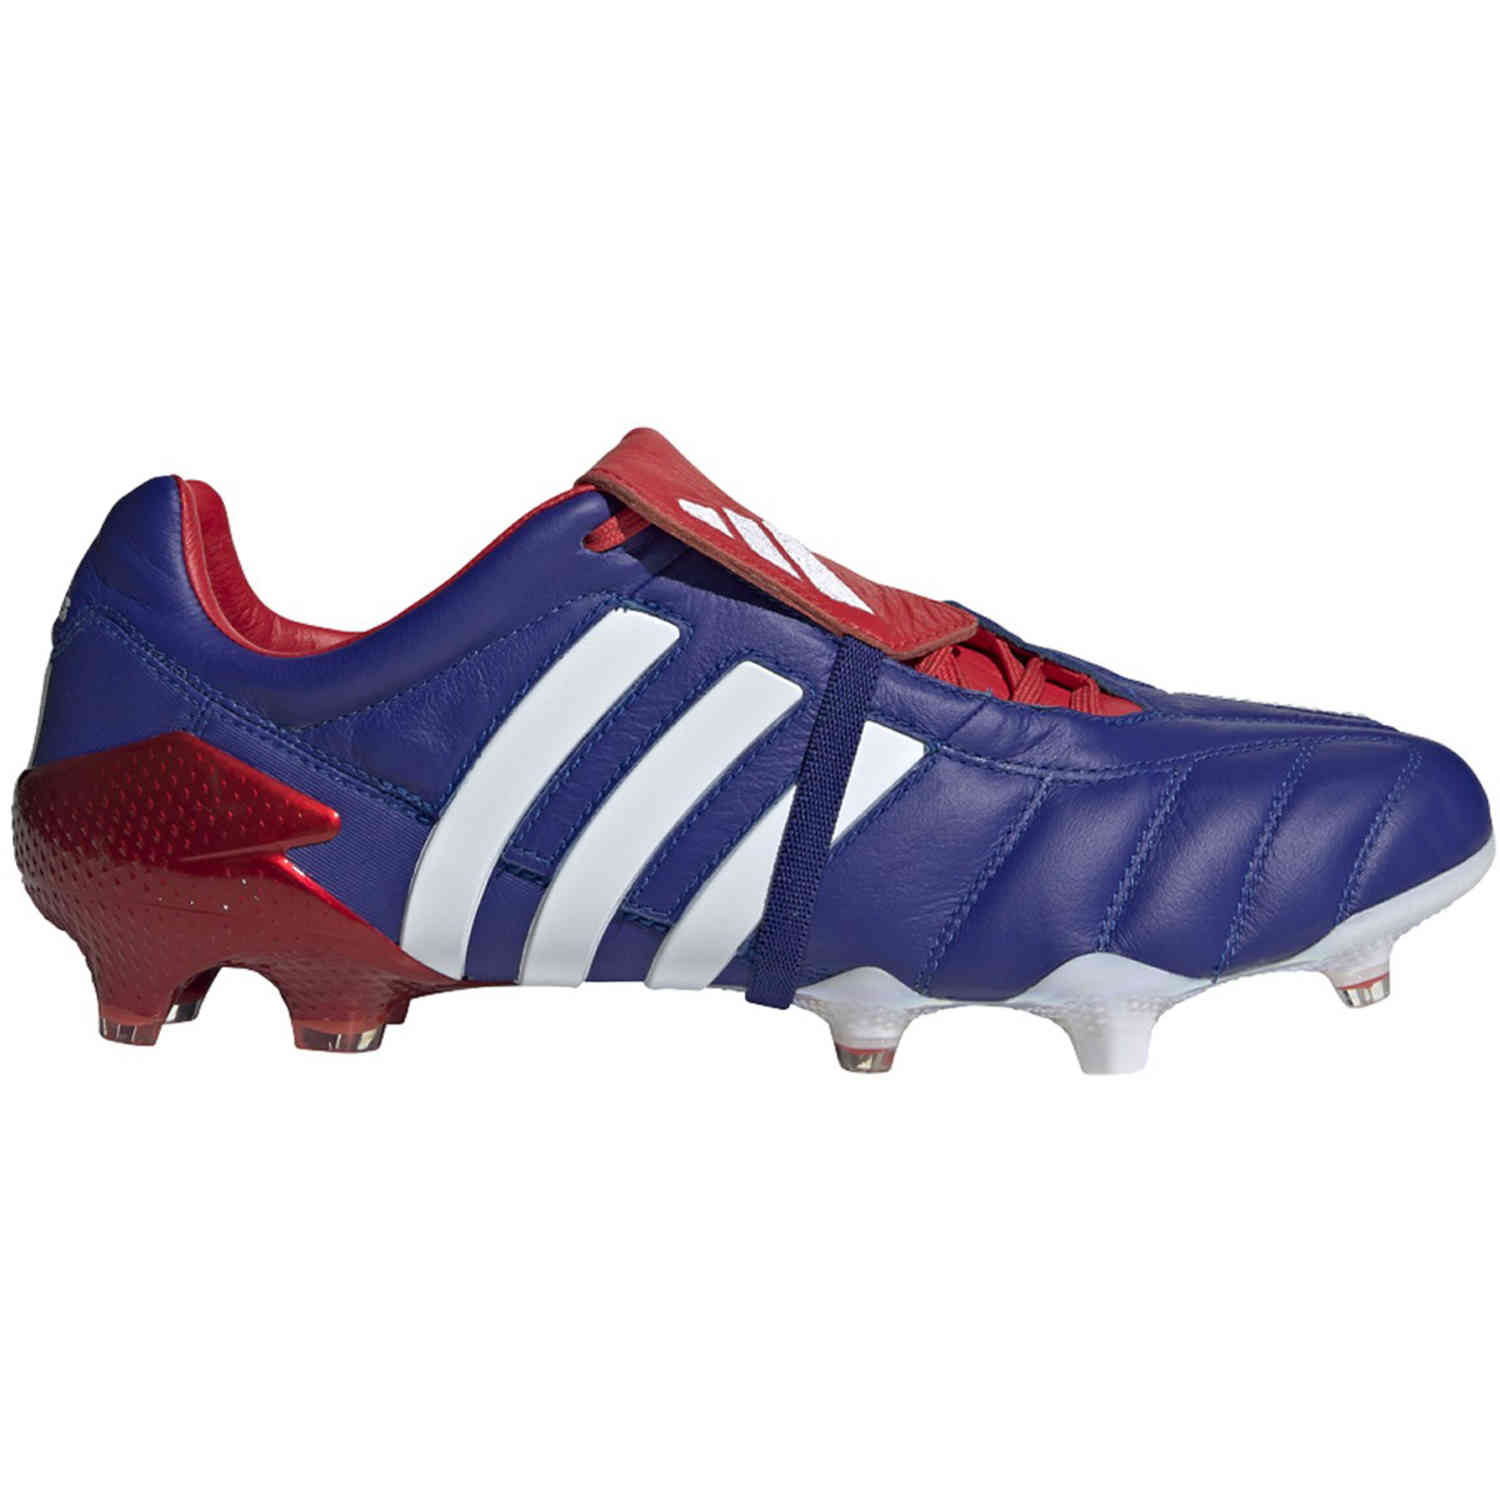 Mens adidas Predator Mania - Team Royal Blue & White with Active Red Soccer Master